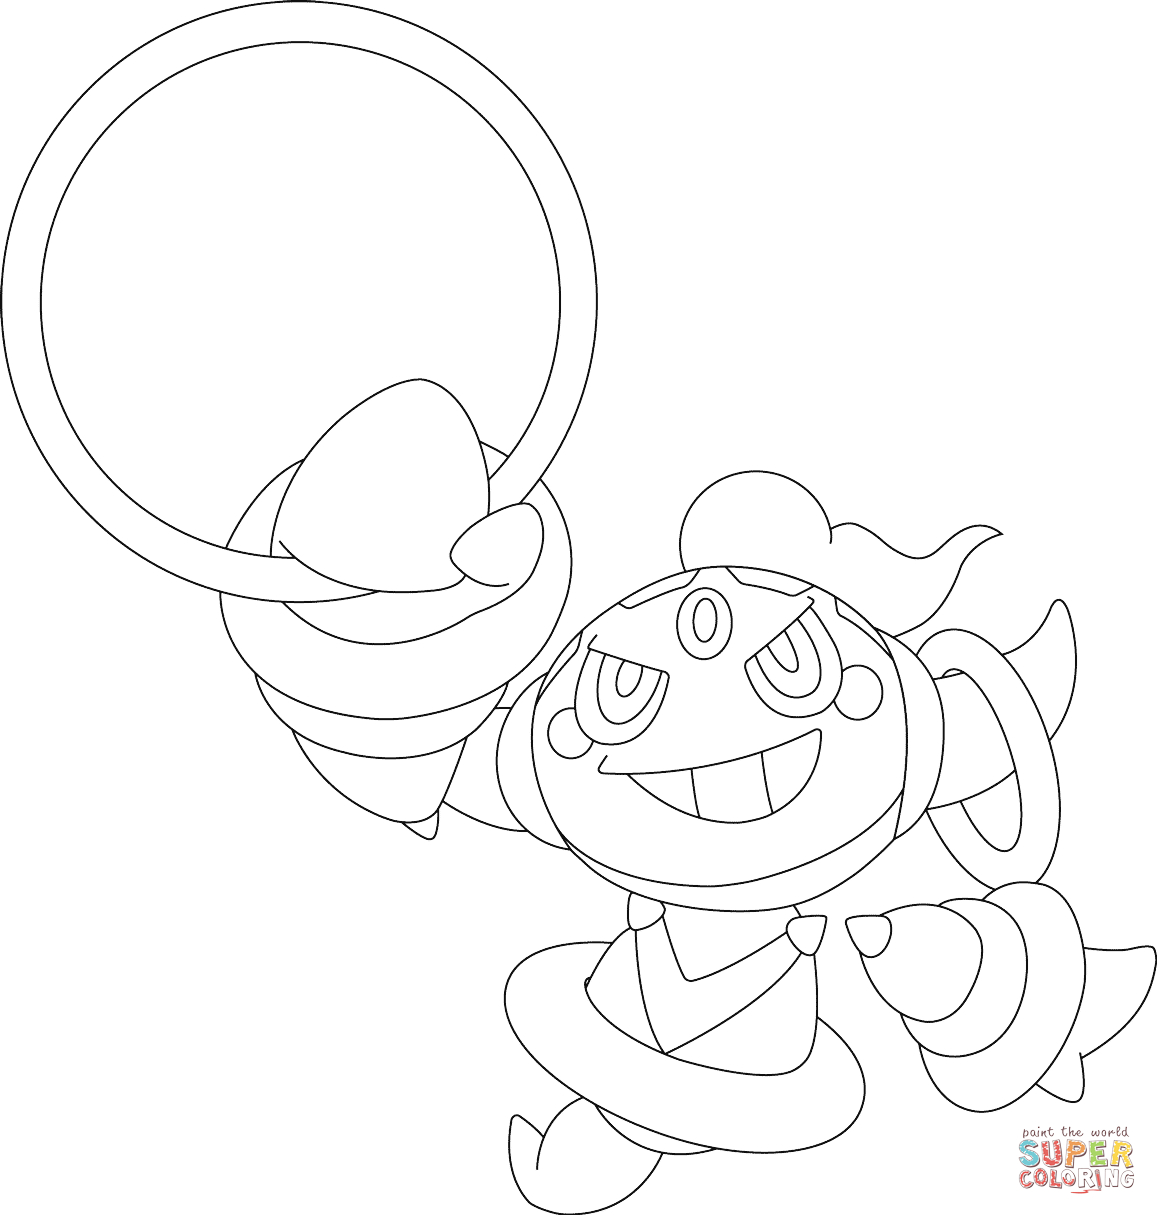 Giratina Coloring Pages Rare Pokemon Coloring Pages At Getdrawings Free For Personal